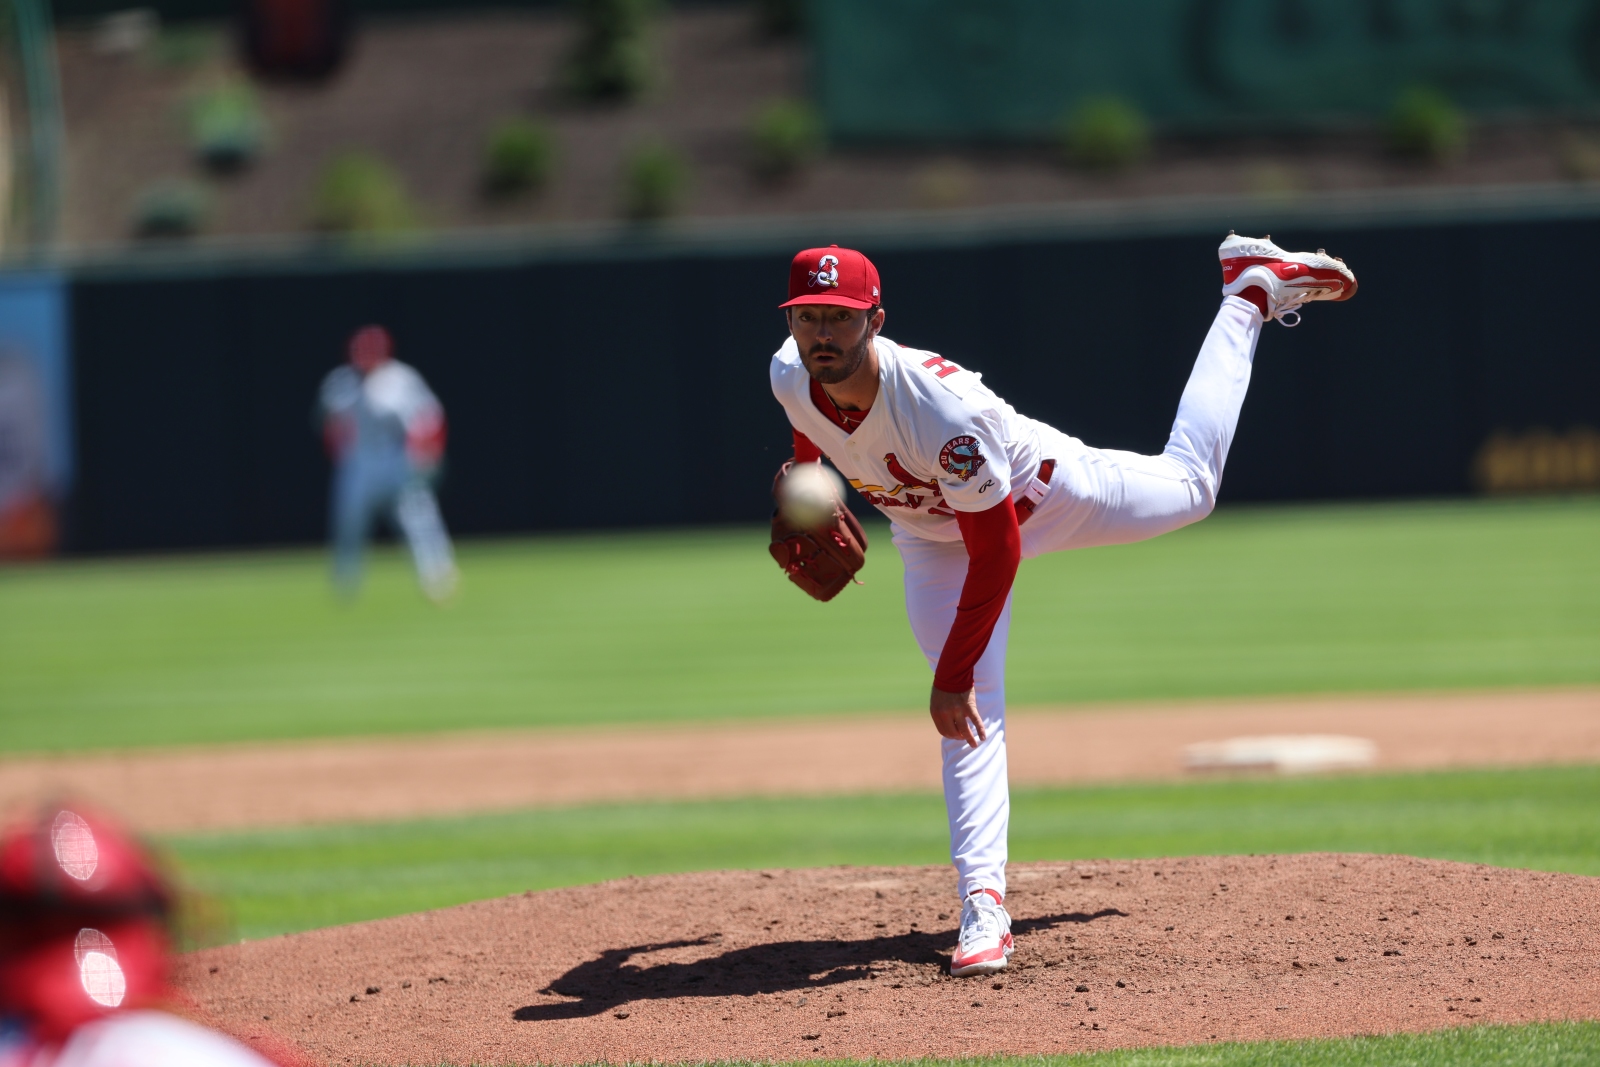 Cooper Hjerpe, wearing a Springfield Cardinals uniform, pitches the baseball during a game at Hammons Field in Springfield, Missouri.